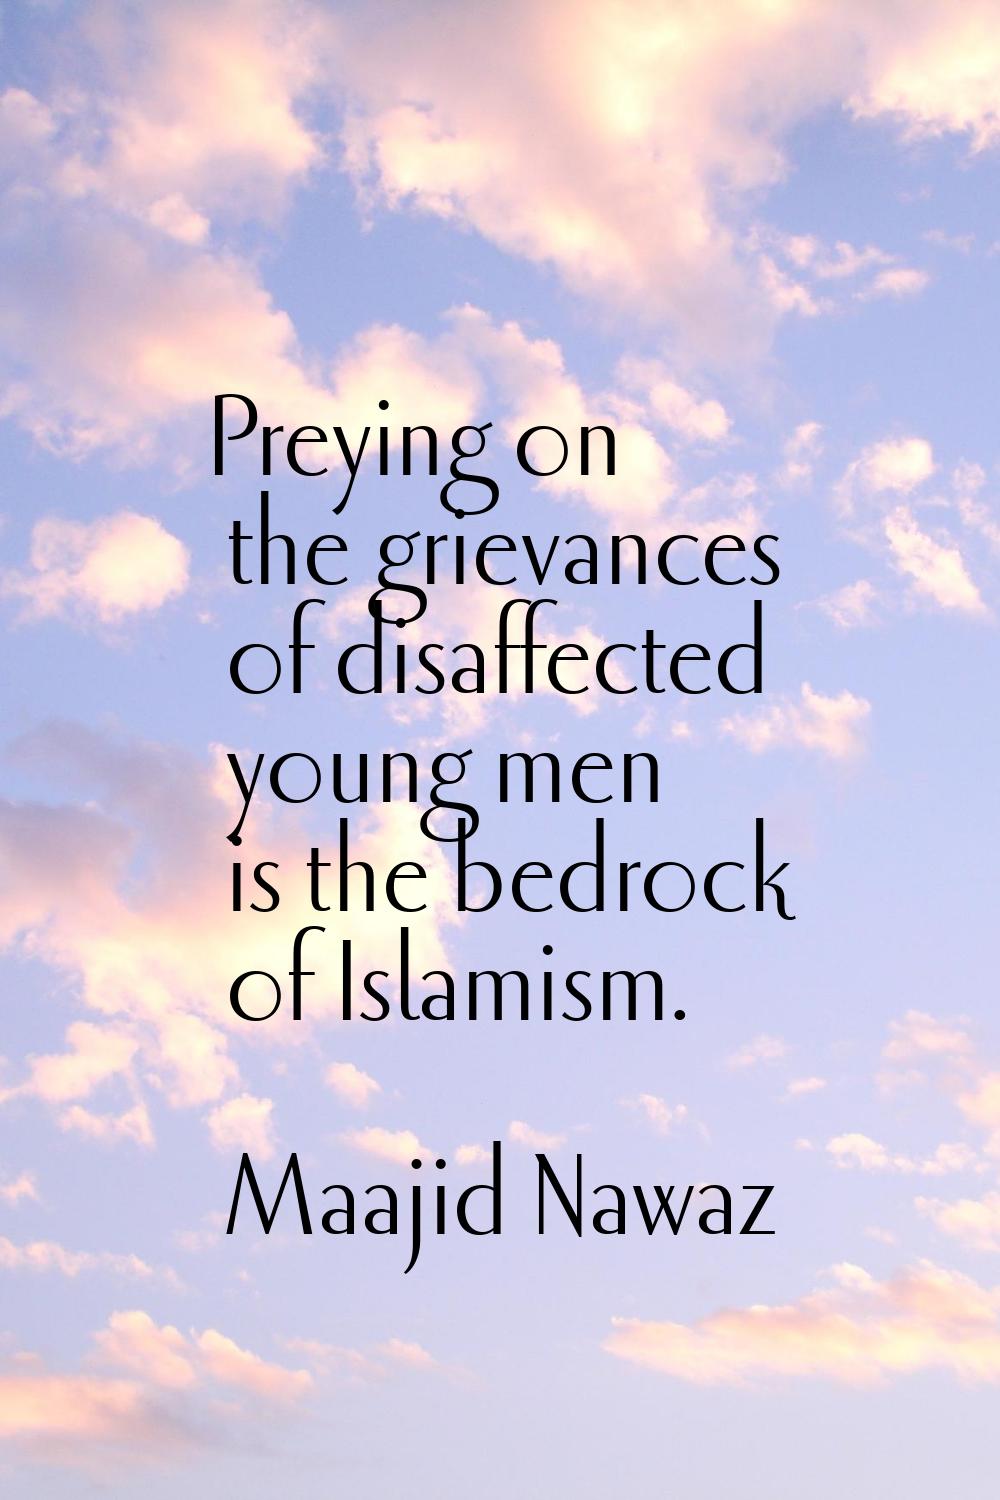 Preying on the grievances of disaffected young men is the bedrock of Islamism.